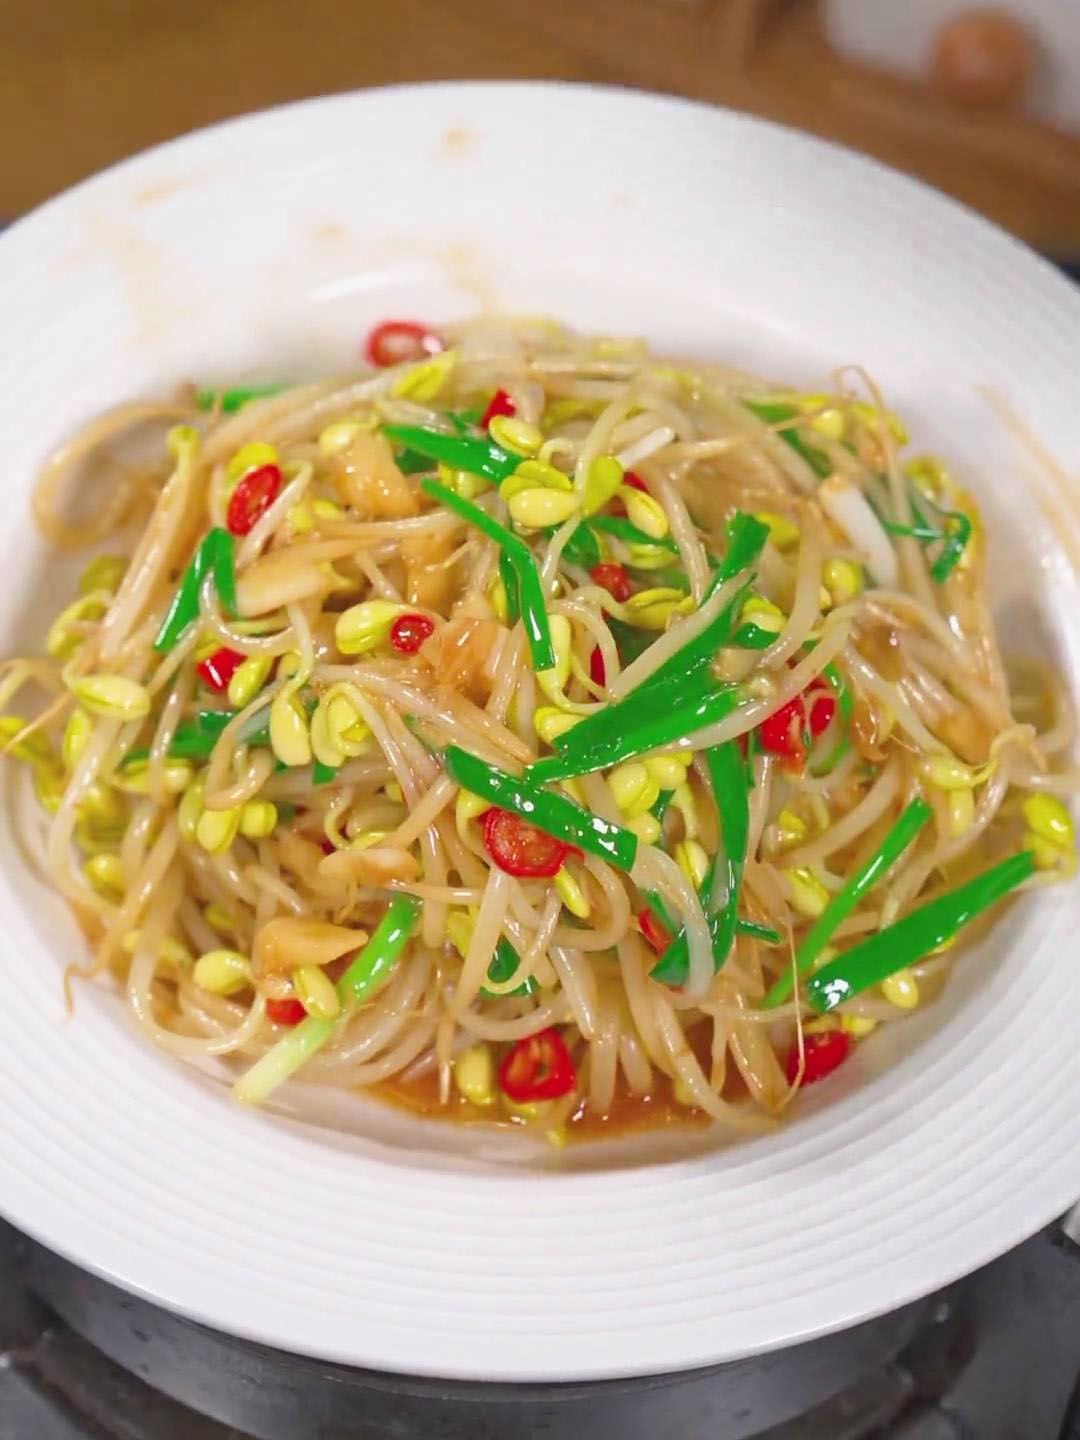 Stir Fry Bean Sprouts2